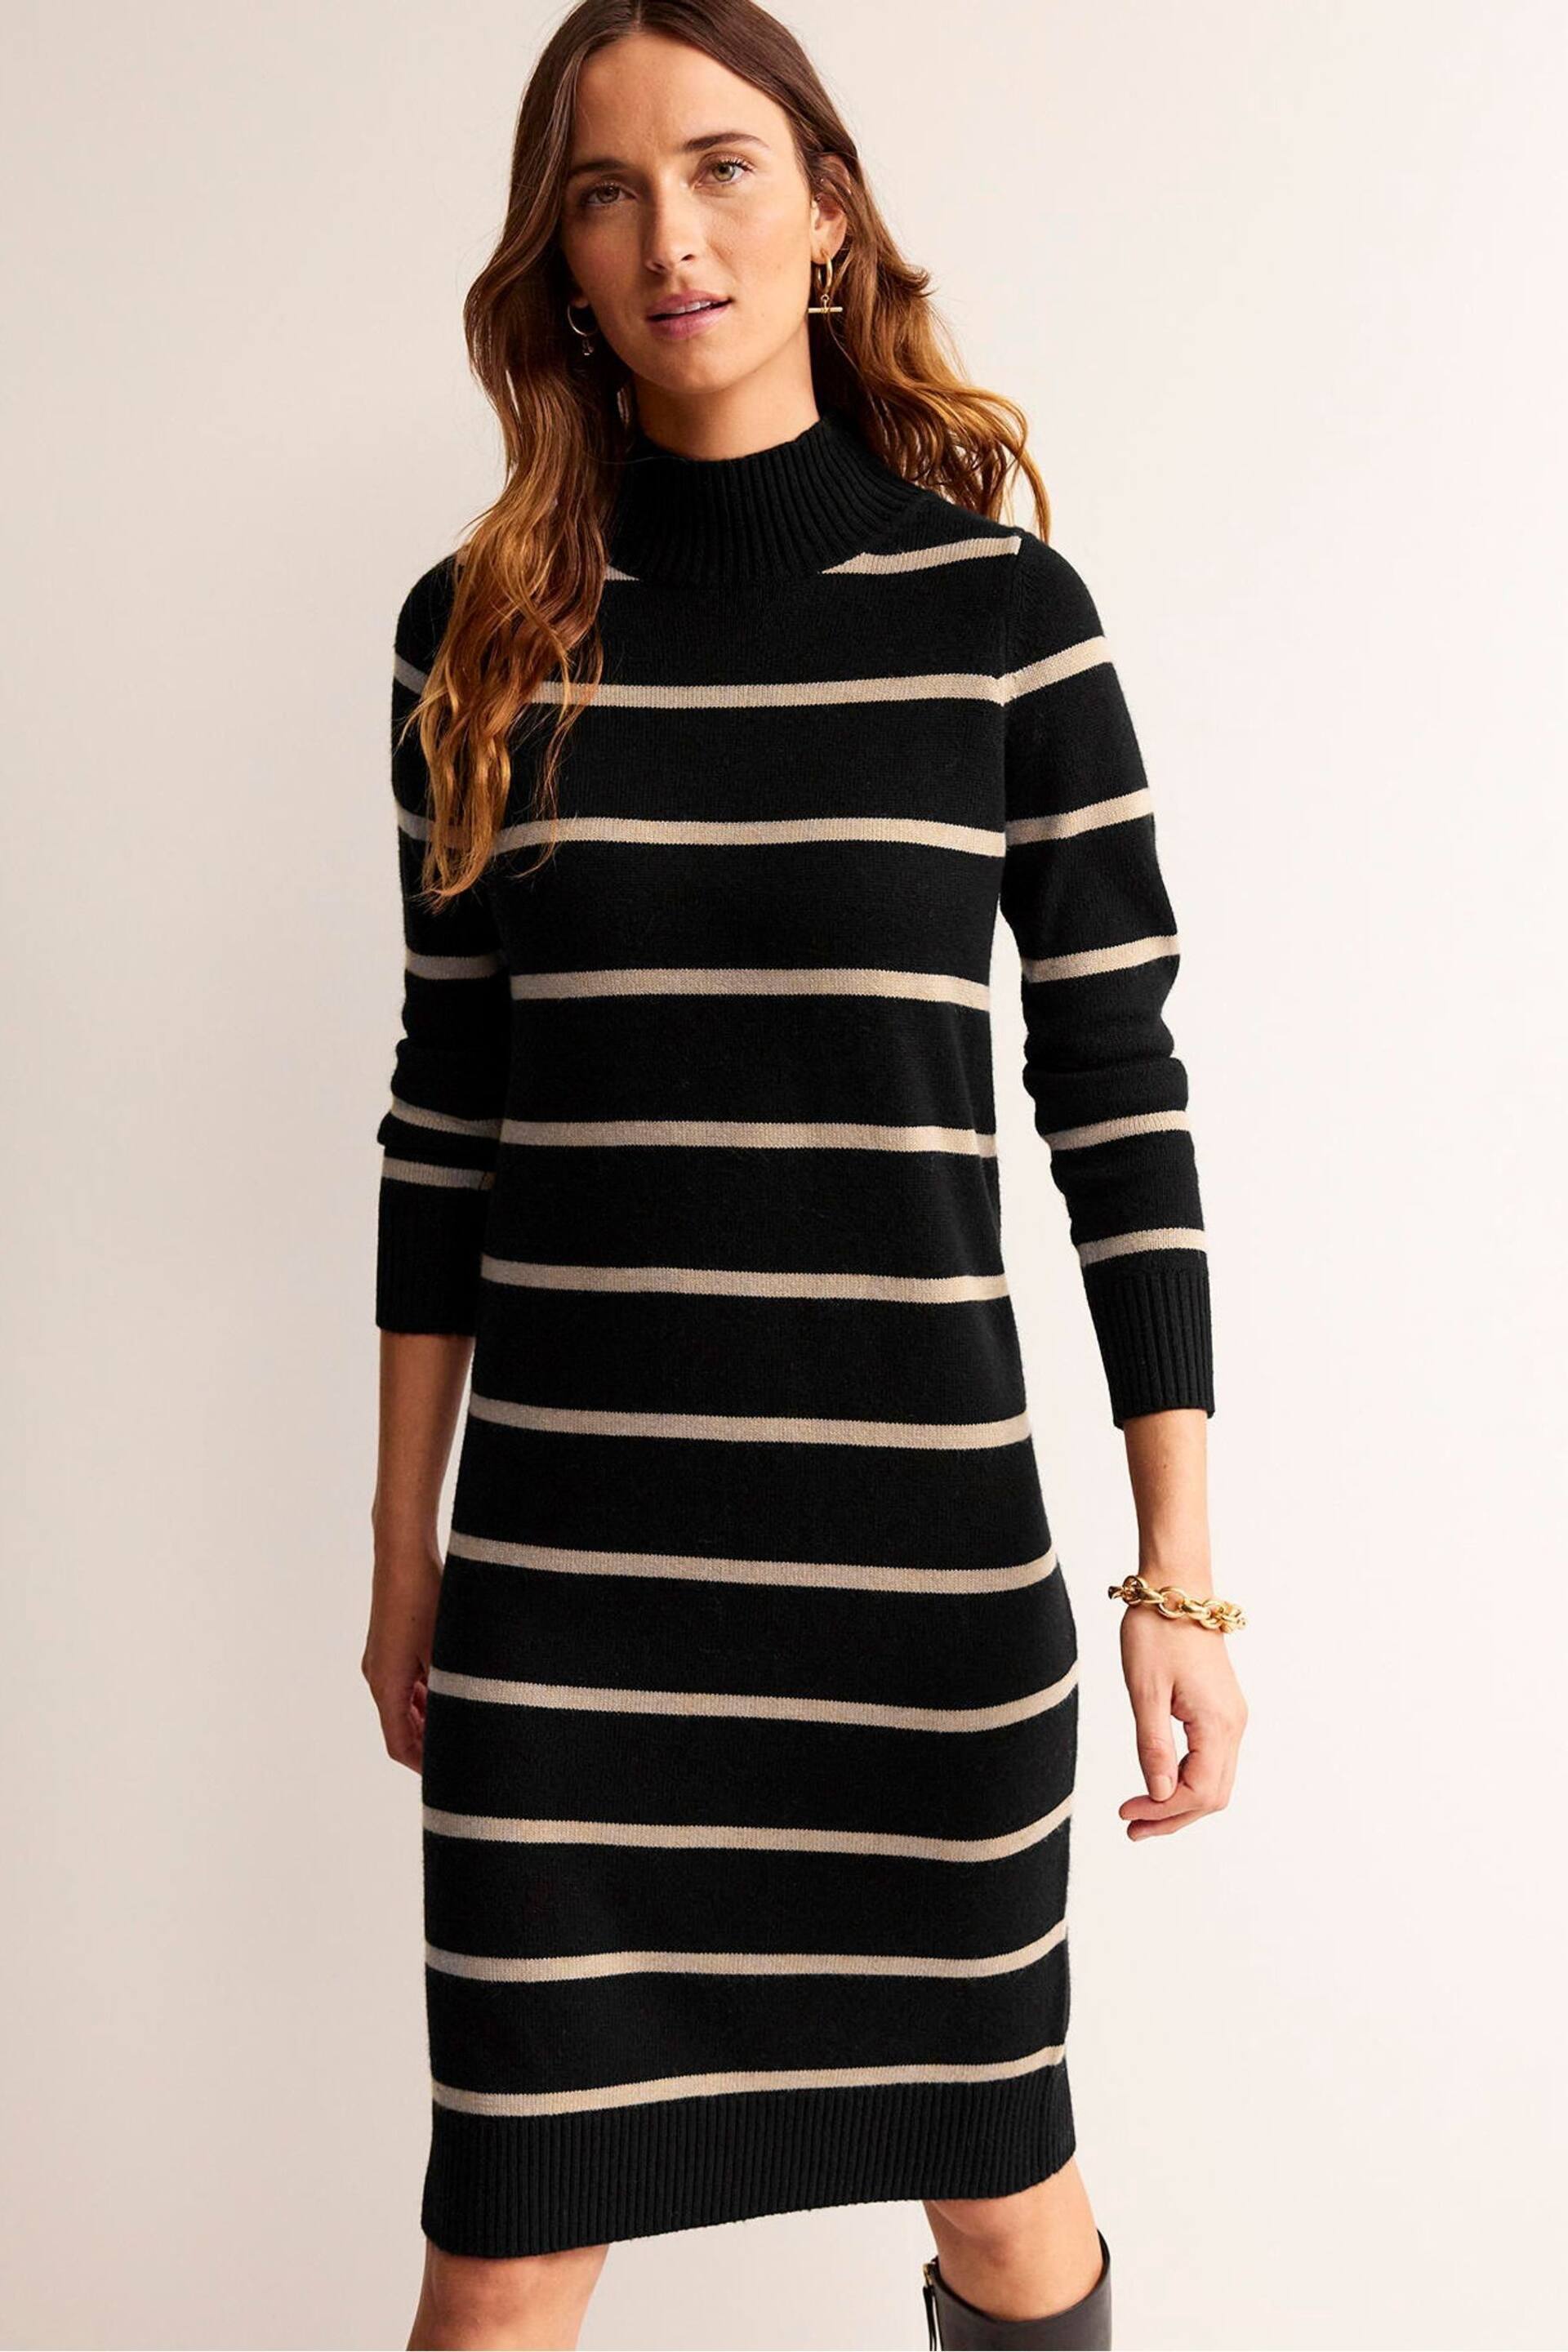 Boden Black Verity Knitted Dress - Image 1 of 6